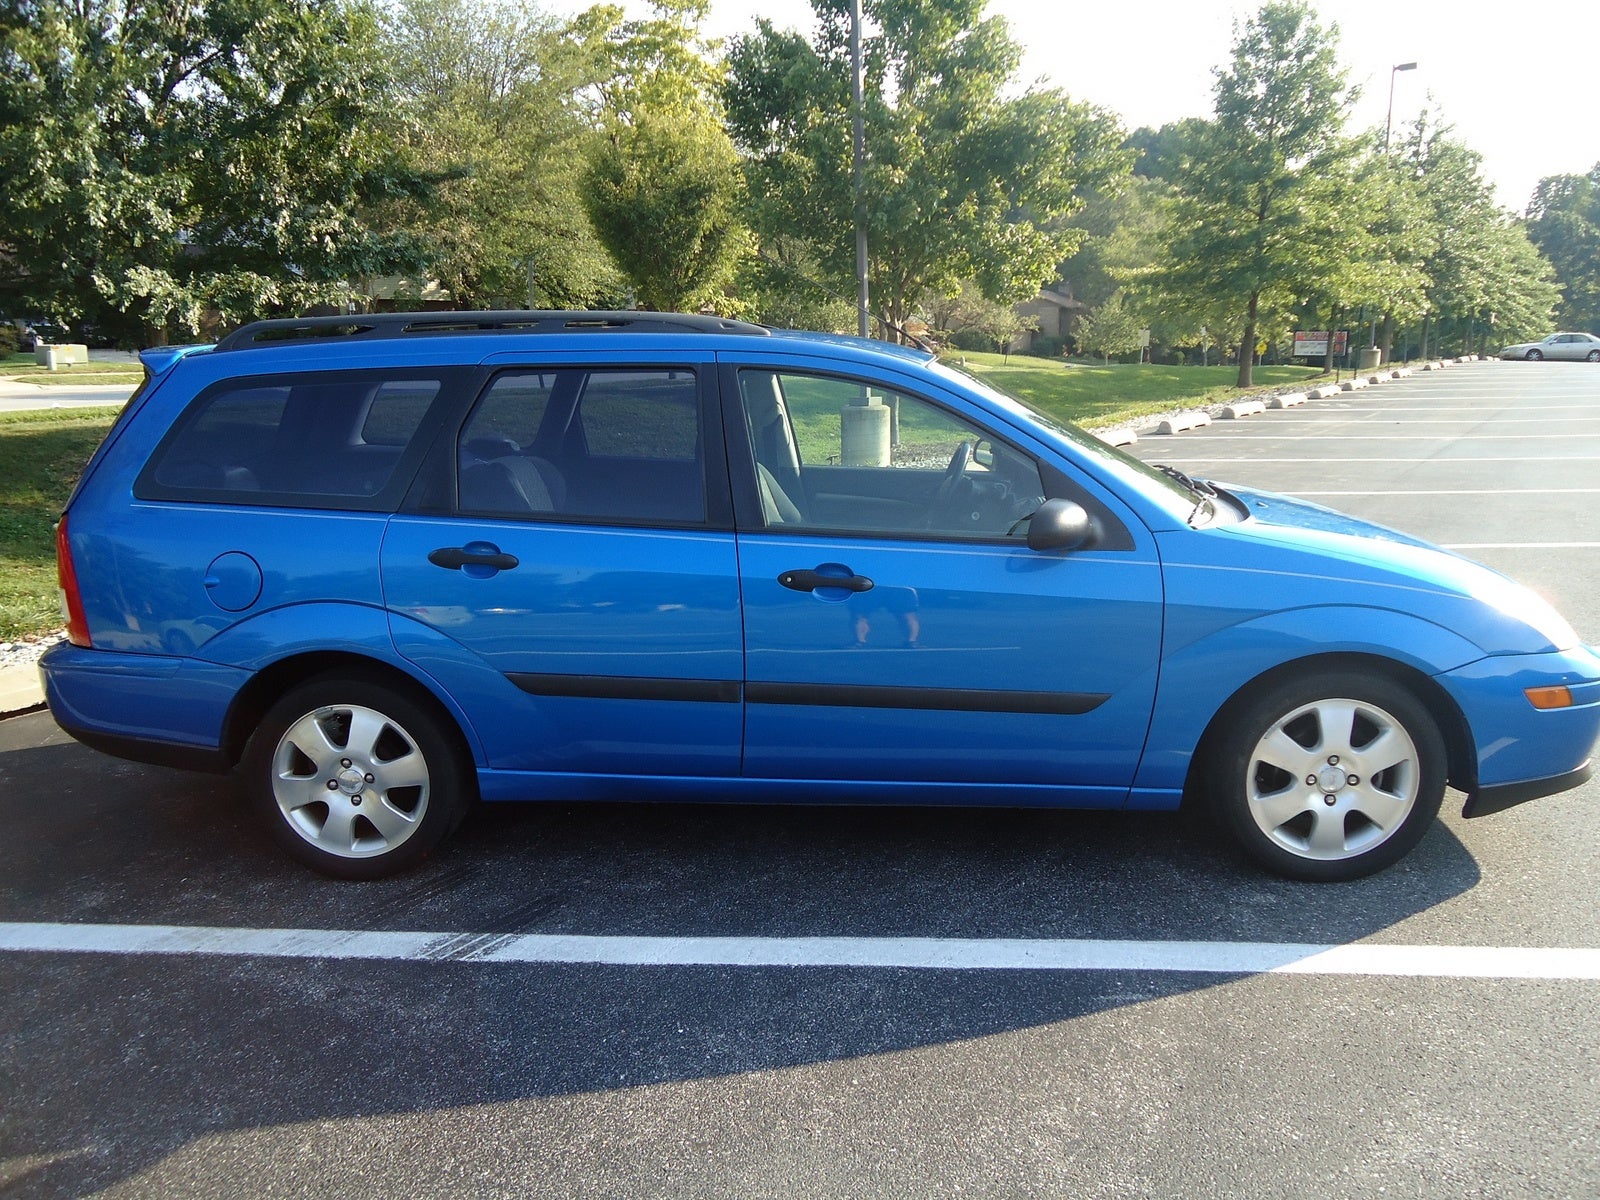 2001 Ford focus se wagon owners manual #8